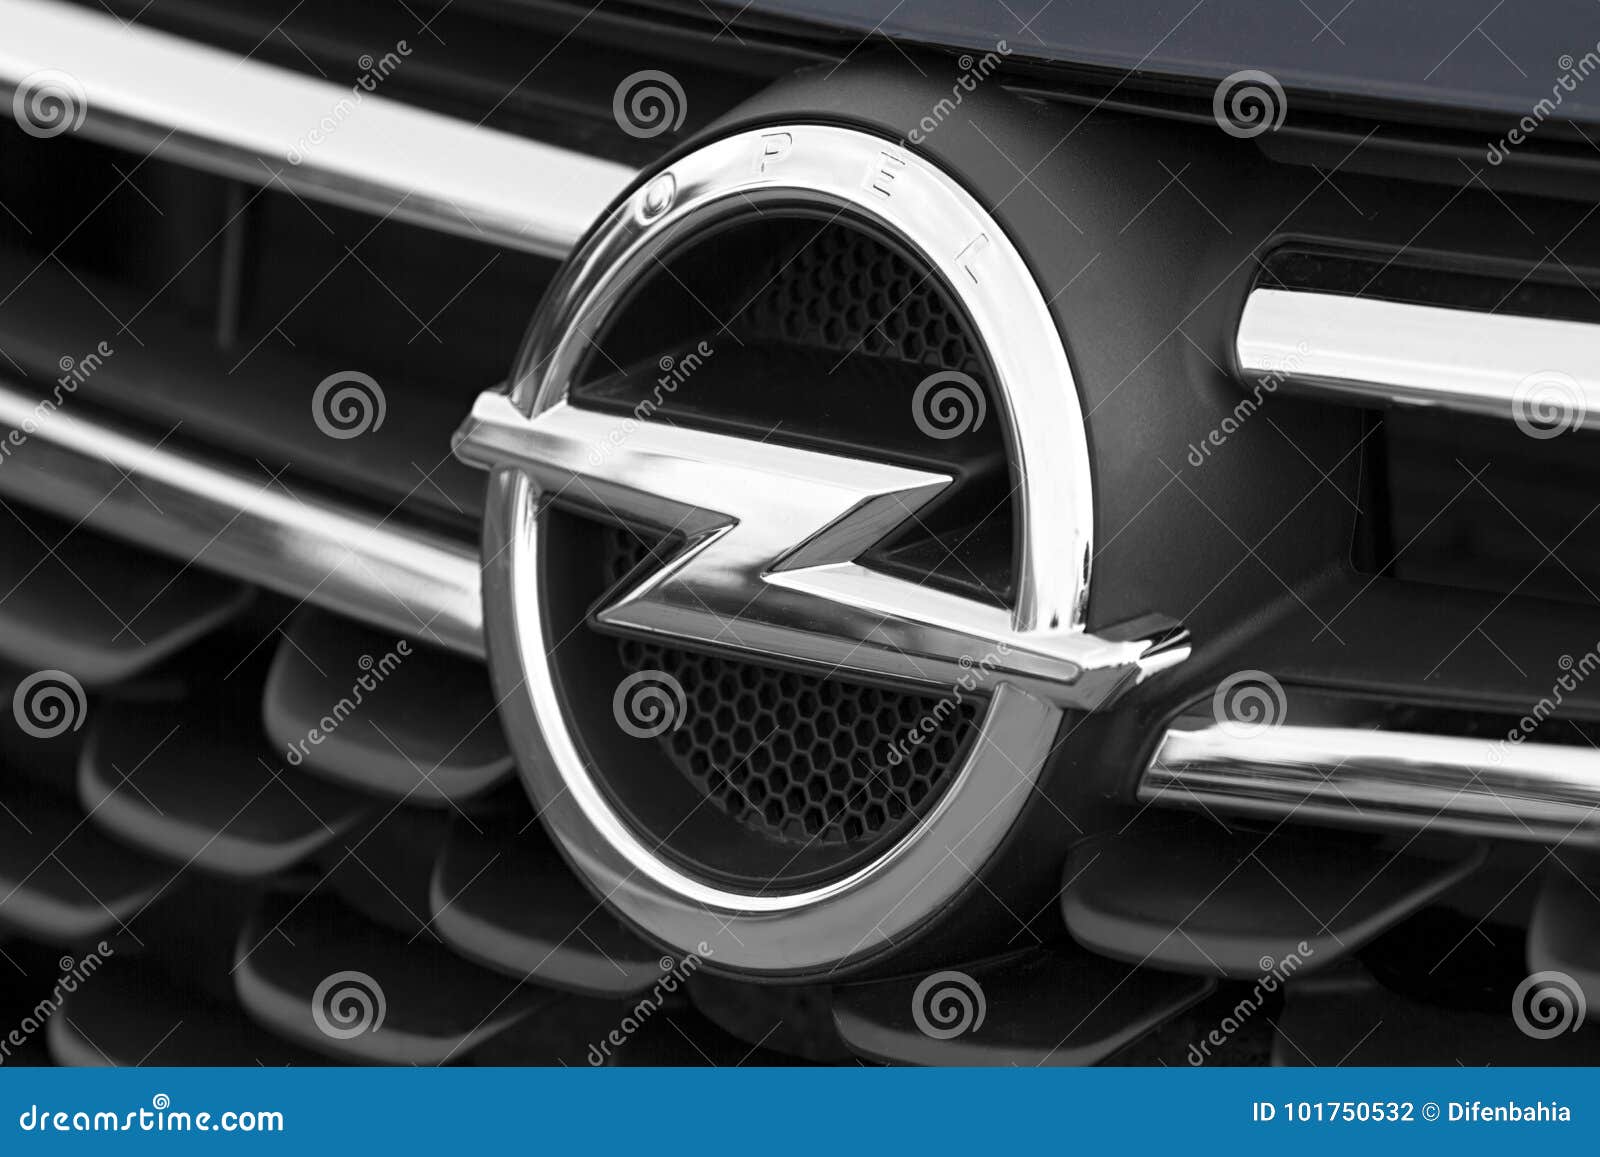 https://thumbs.dreamstime.com/z/zamosc-poland-october-closeup-opel-logo-front-car-opel-german-automobile-manufacturer-subsidiary-101750532.jpg